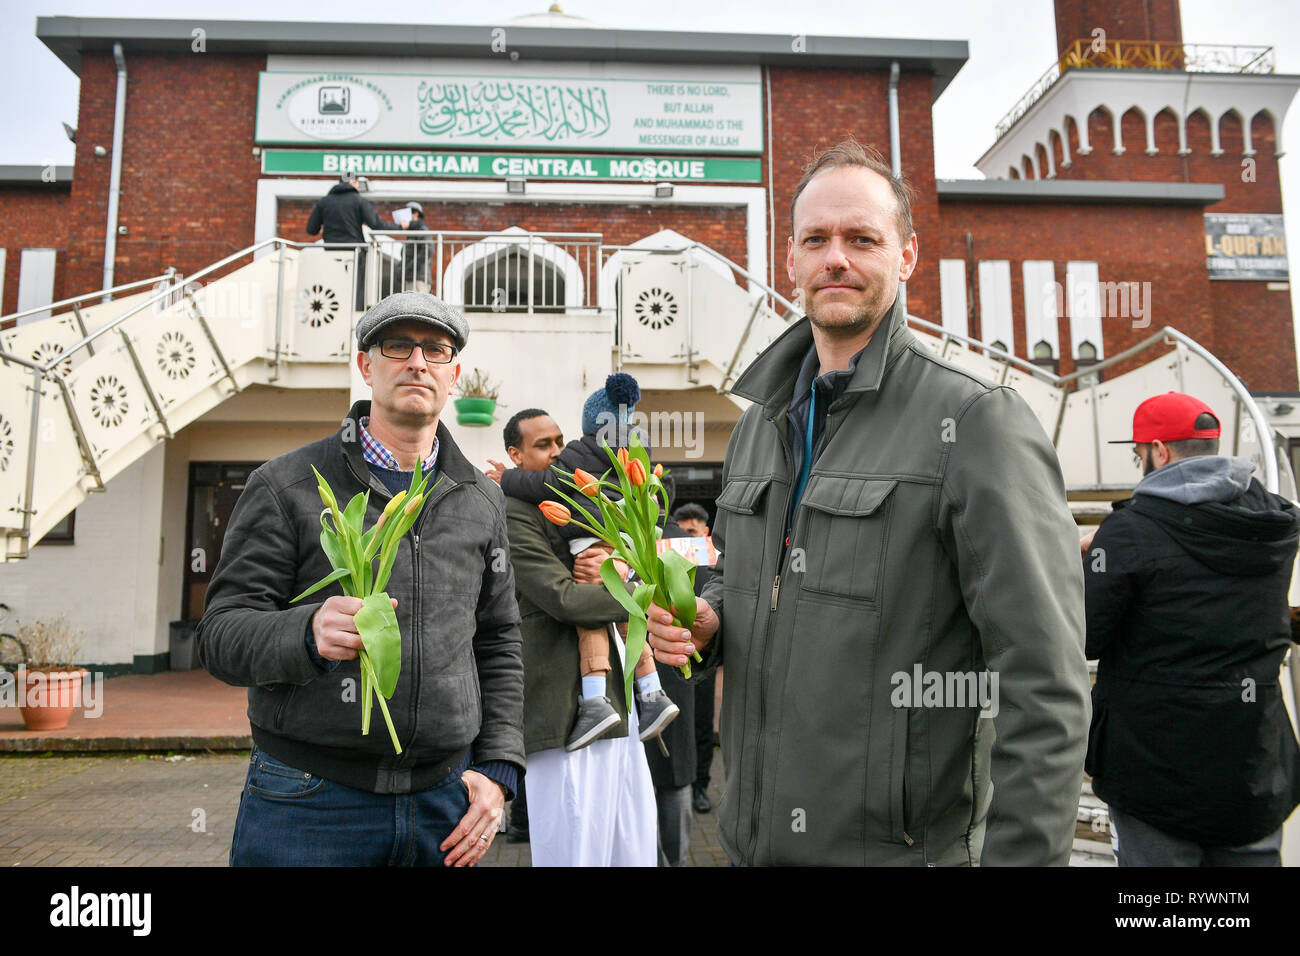 Christians James Lynch, left, and Marcus Kapers from Riverside Church, who are handing out flowers to Muslims as they leave Birmingham Central Mosque after the attack on the Mosque in Christchurch, New Zealand. Stock Photo